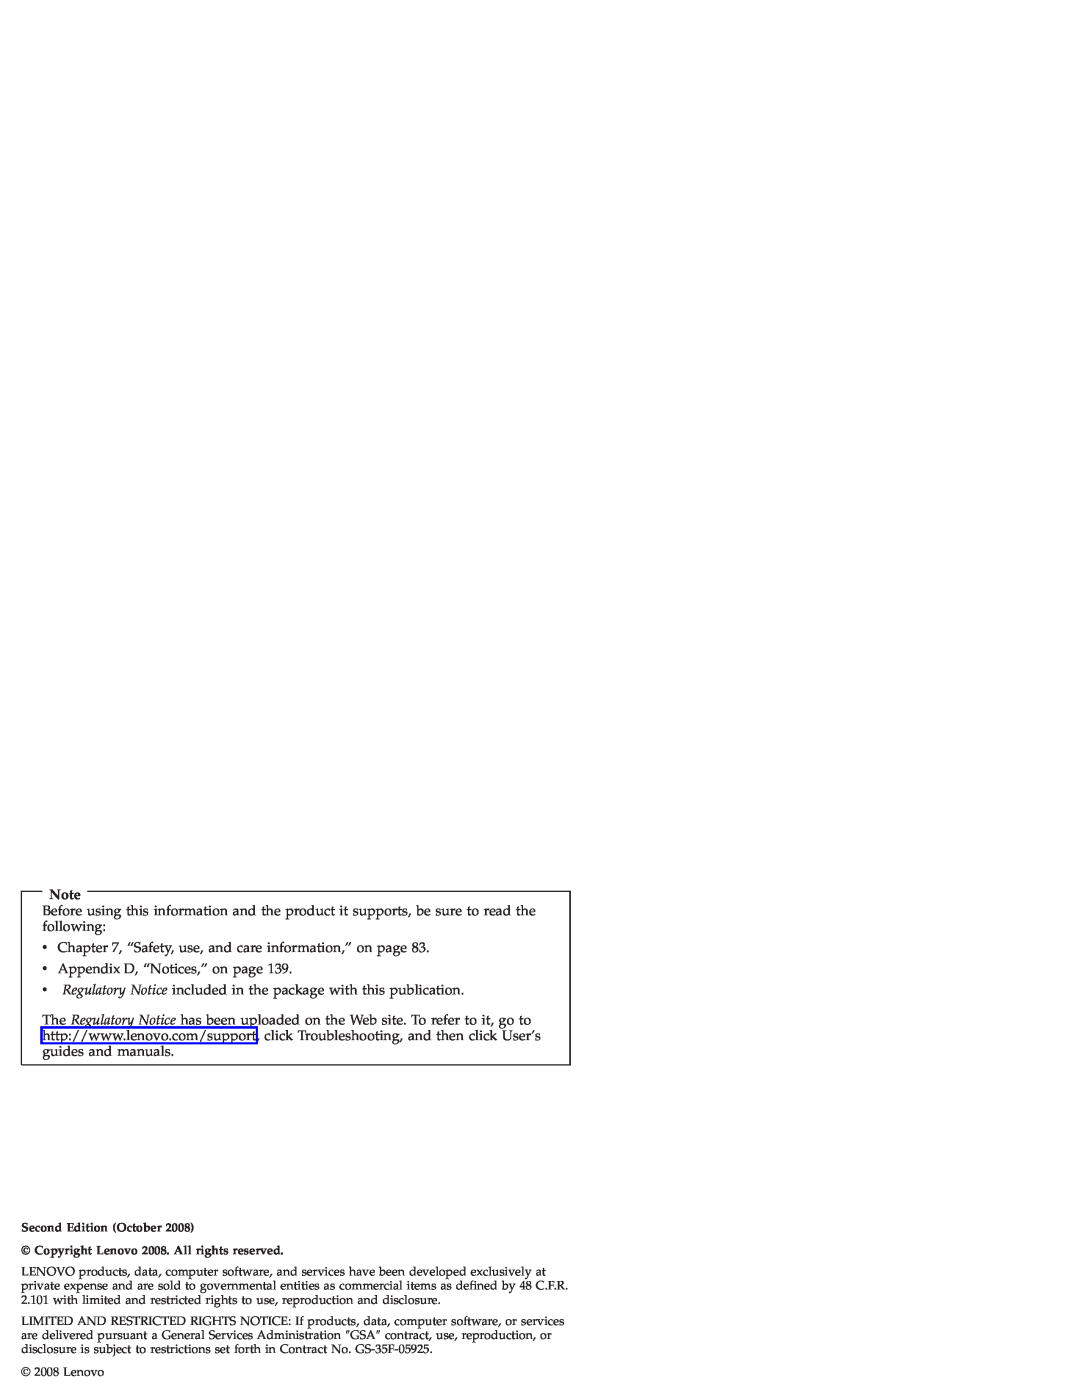 Lenovo S10E, S9E manual v , “Safety, use, and care information,” on page, v Appendix D, “Notices,” on page 